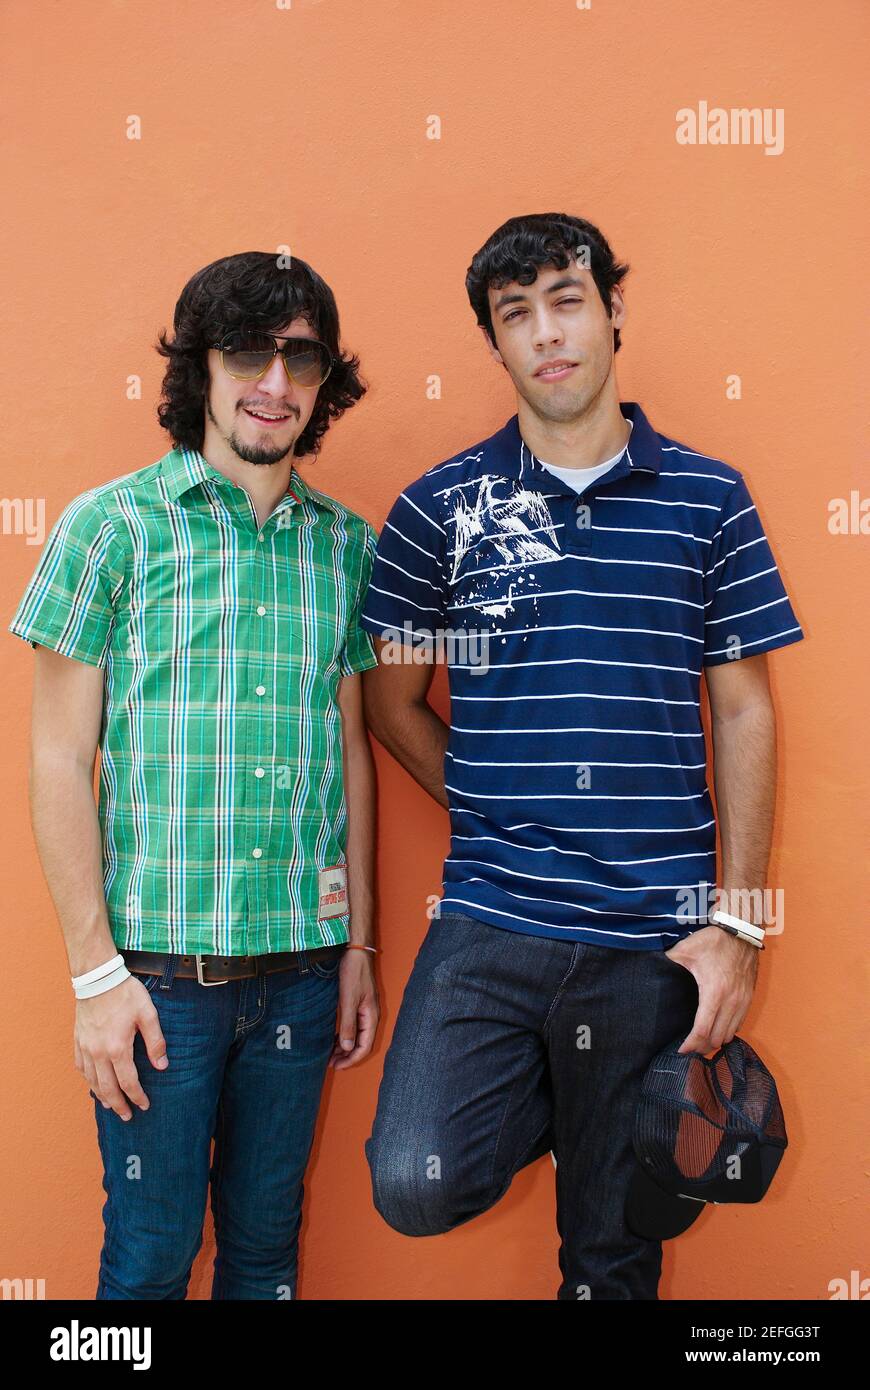 Portrait of two young men standing together Stock Photo